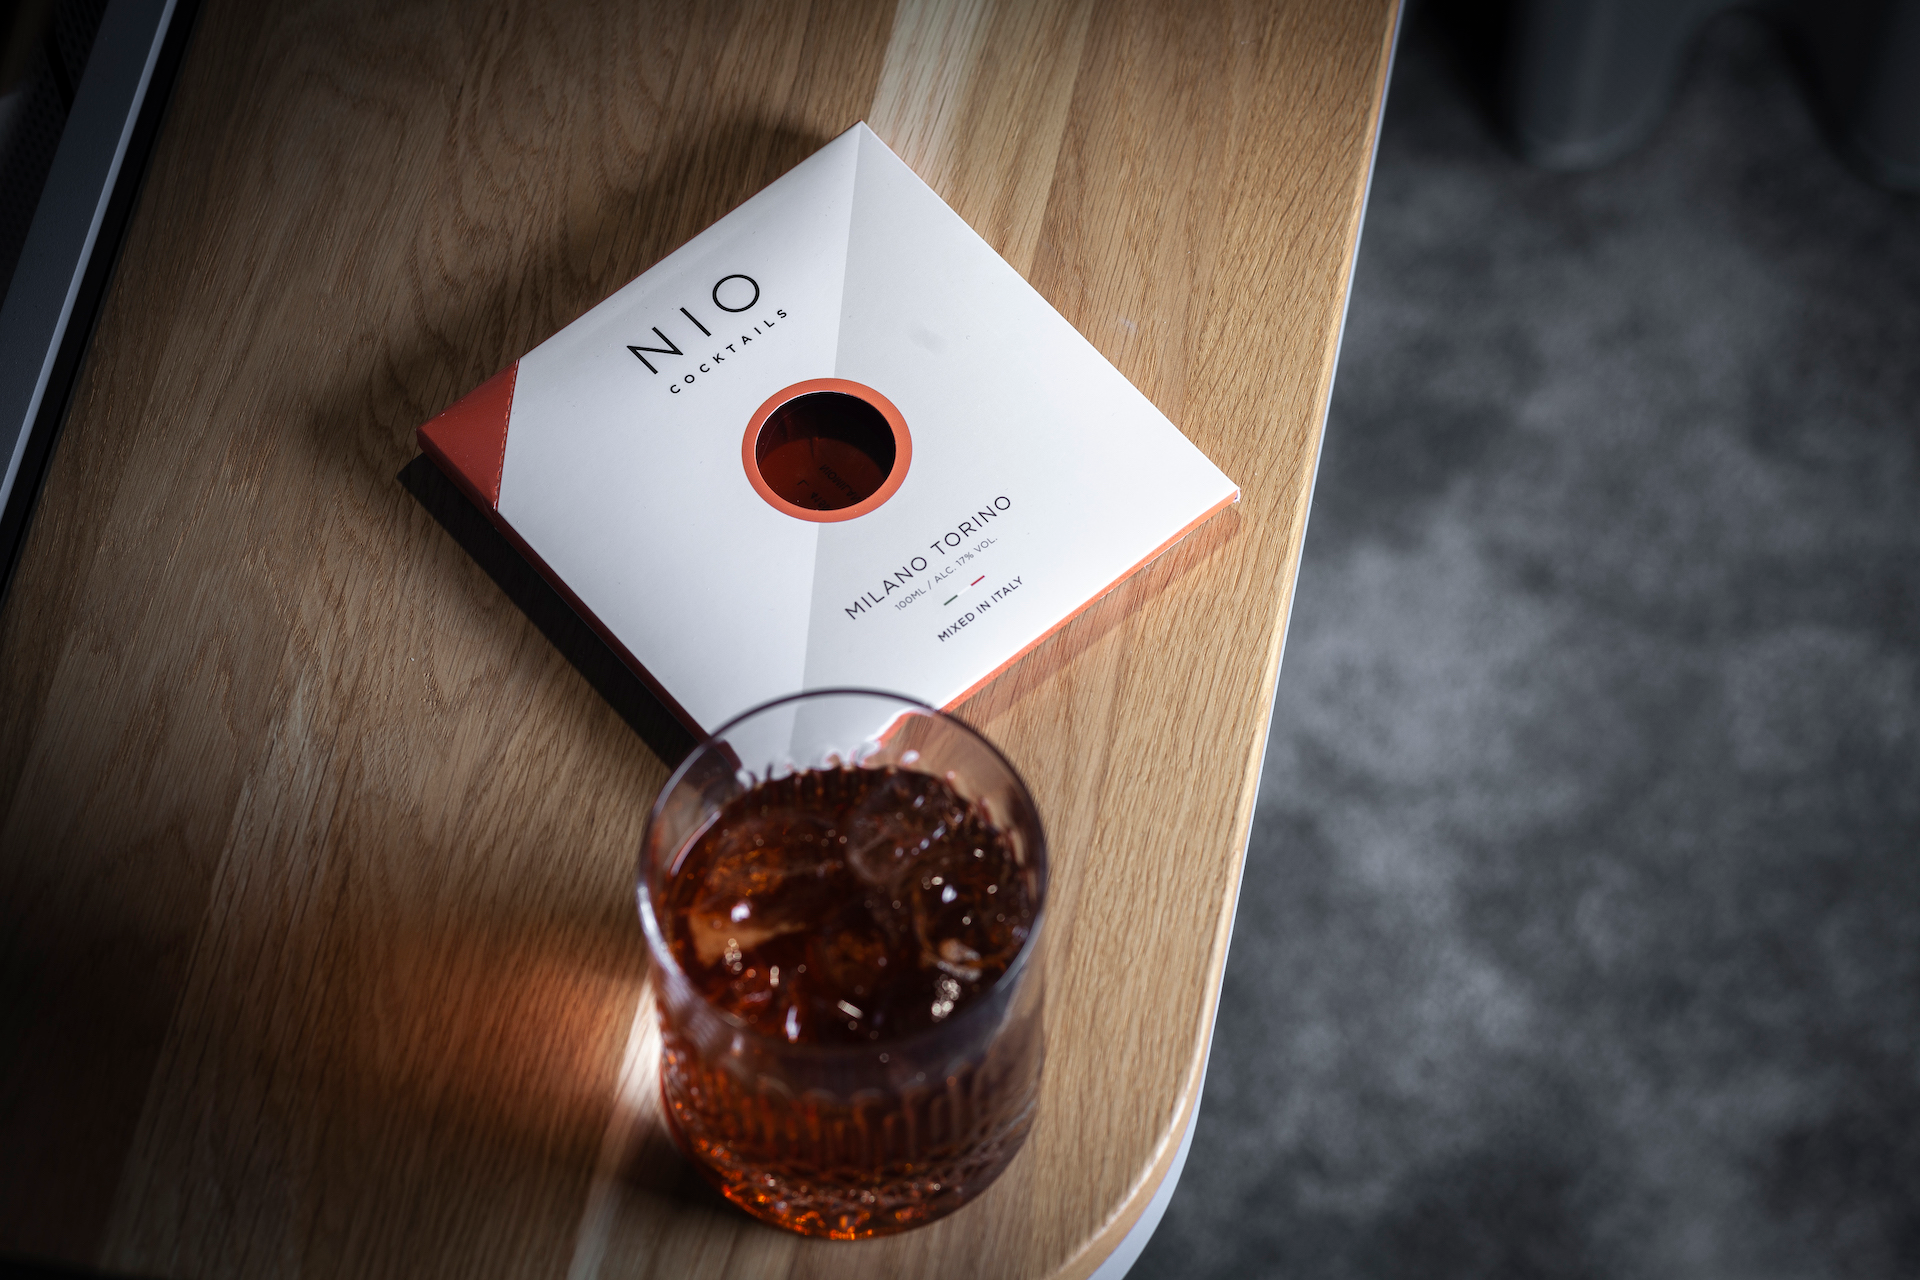 Limited-Edition Festive NIO Cocktails - 24-hour Delivery - The Luxury Report